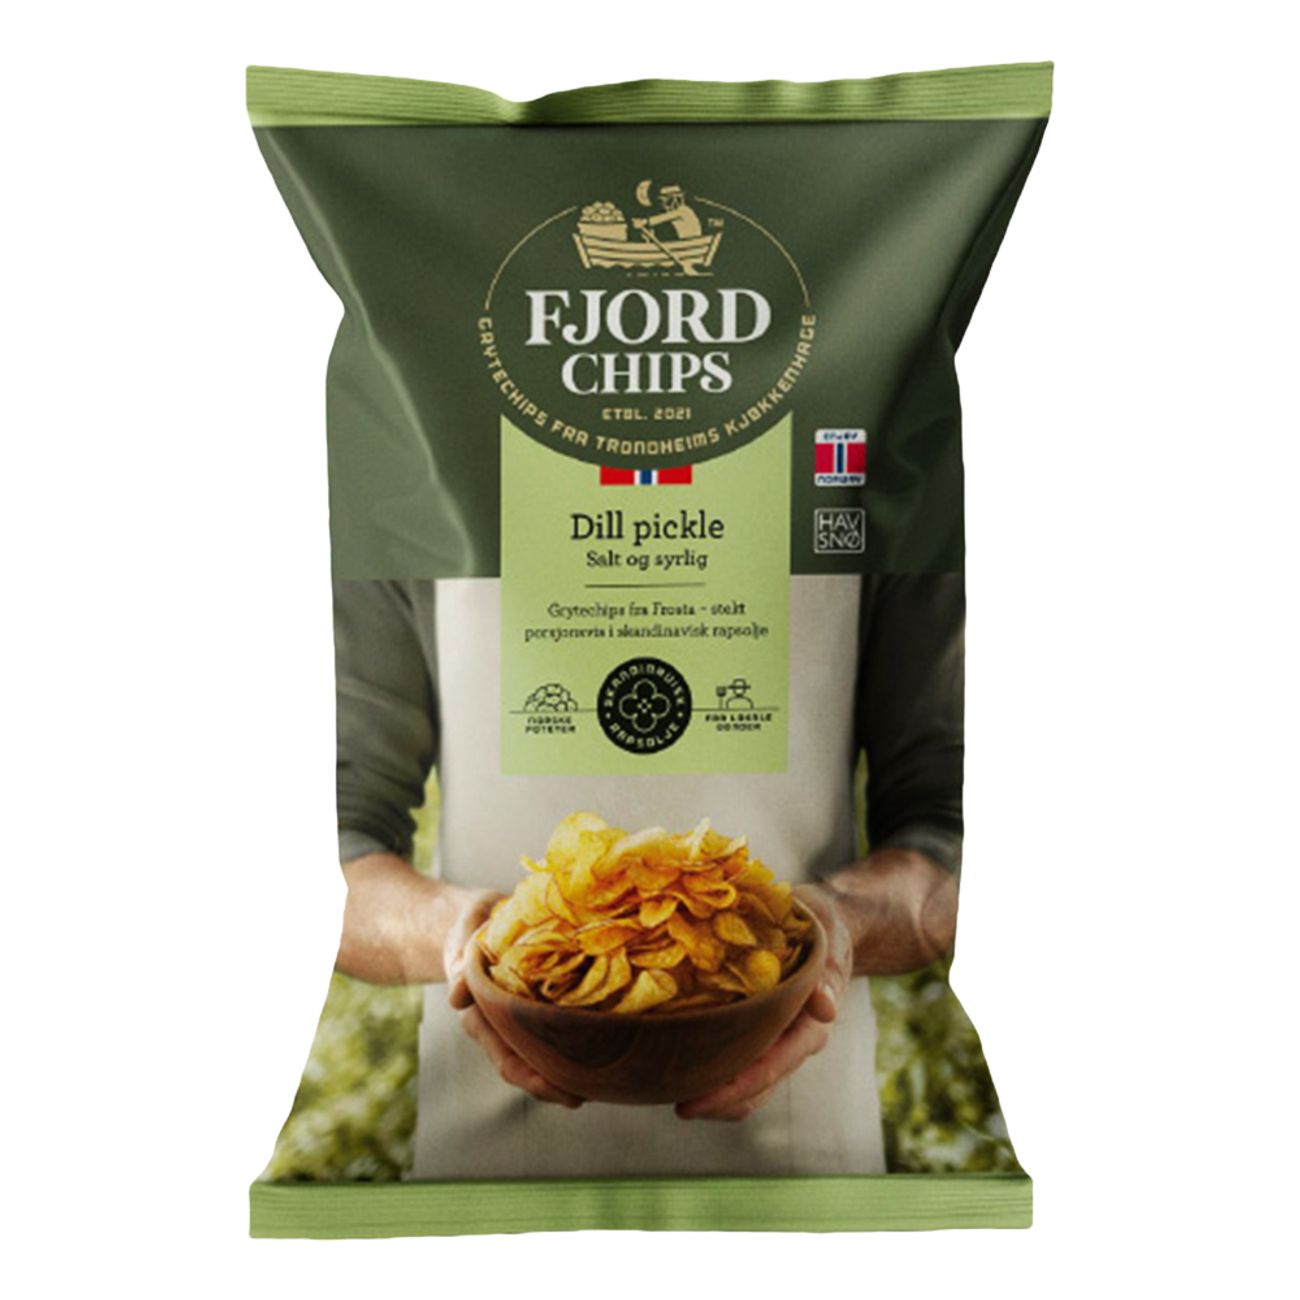 fjordchips-dill-pickle-101294-1